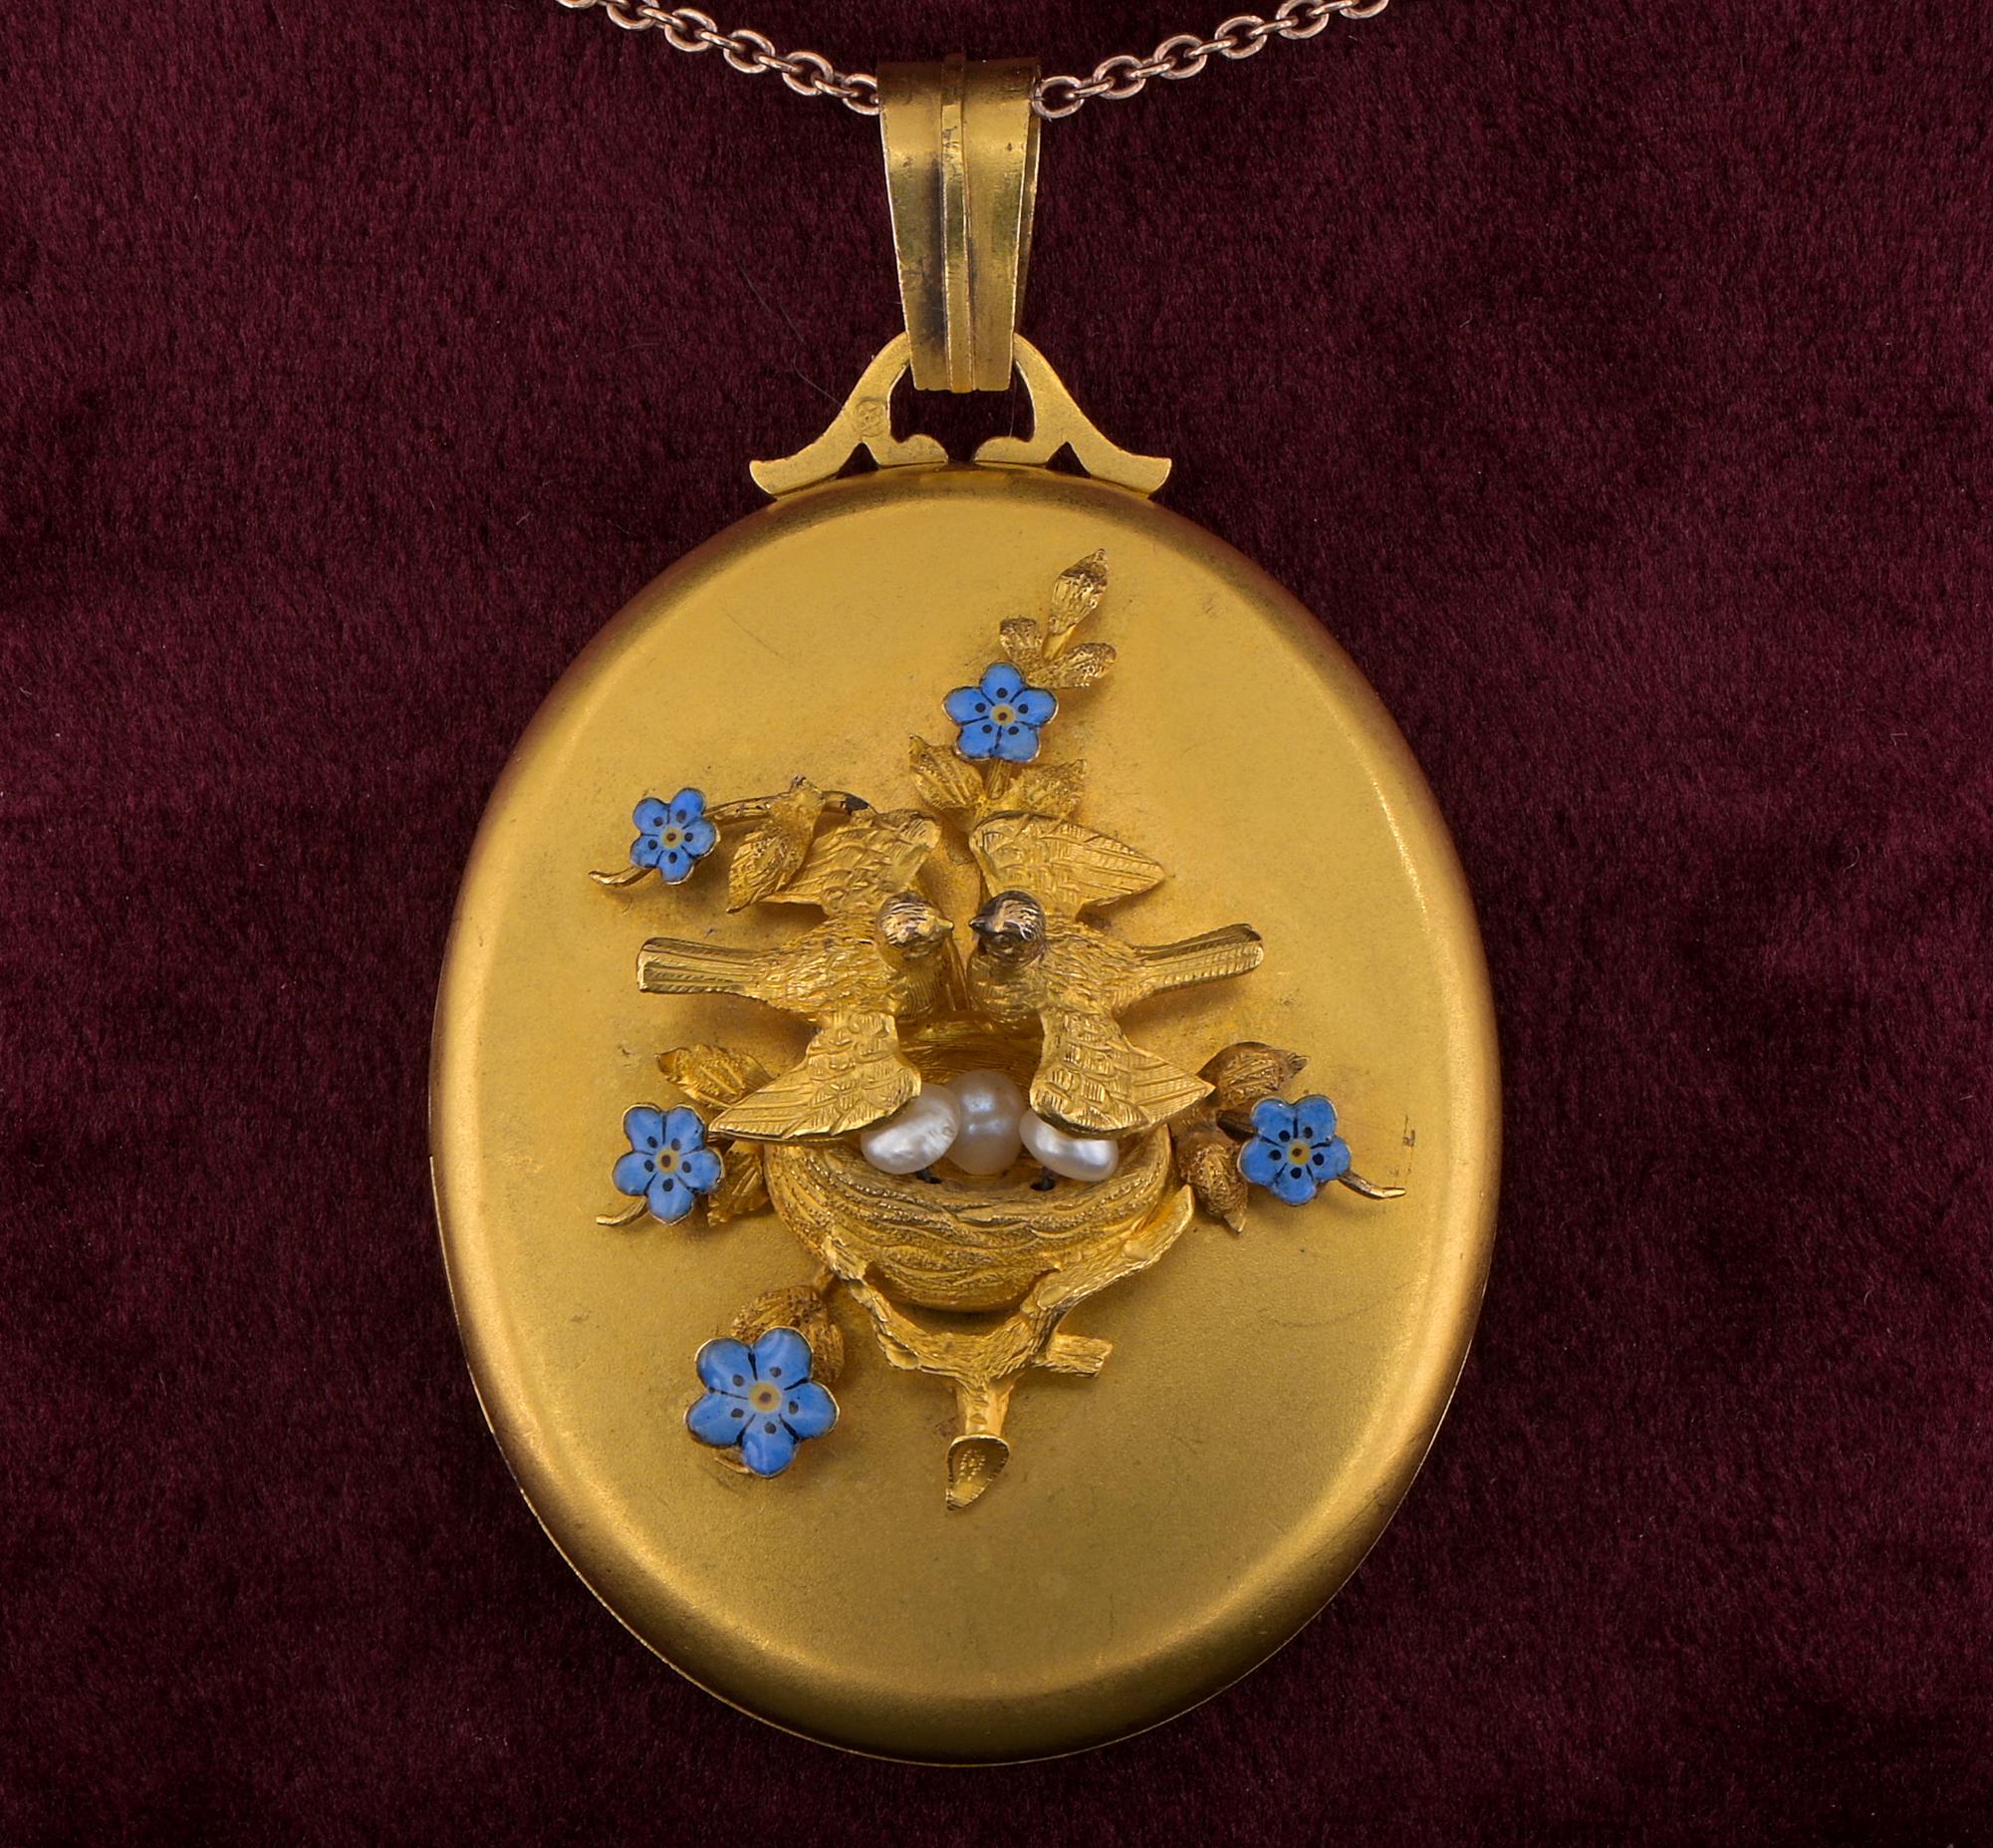 Harry Emanuel Art work
This antique large locket pendant is Victorian period
Distinctive artwork attributed to Harry Emanuel, tests solid 18 KT gold, bearing Austro Hungarian import marks for the period 1872/1902 – later engraved on the back for